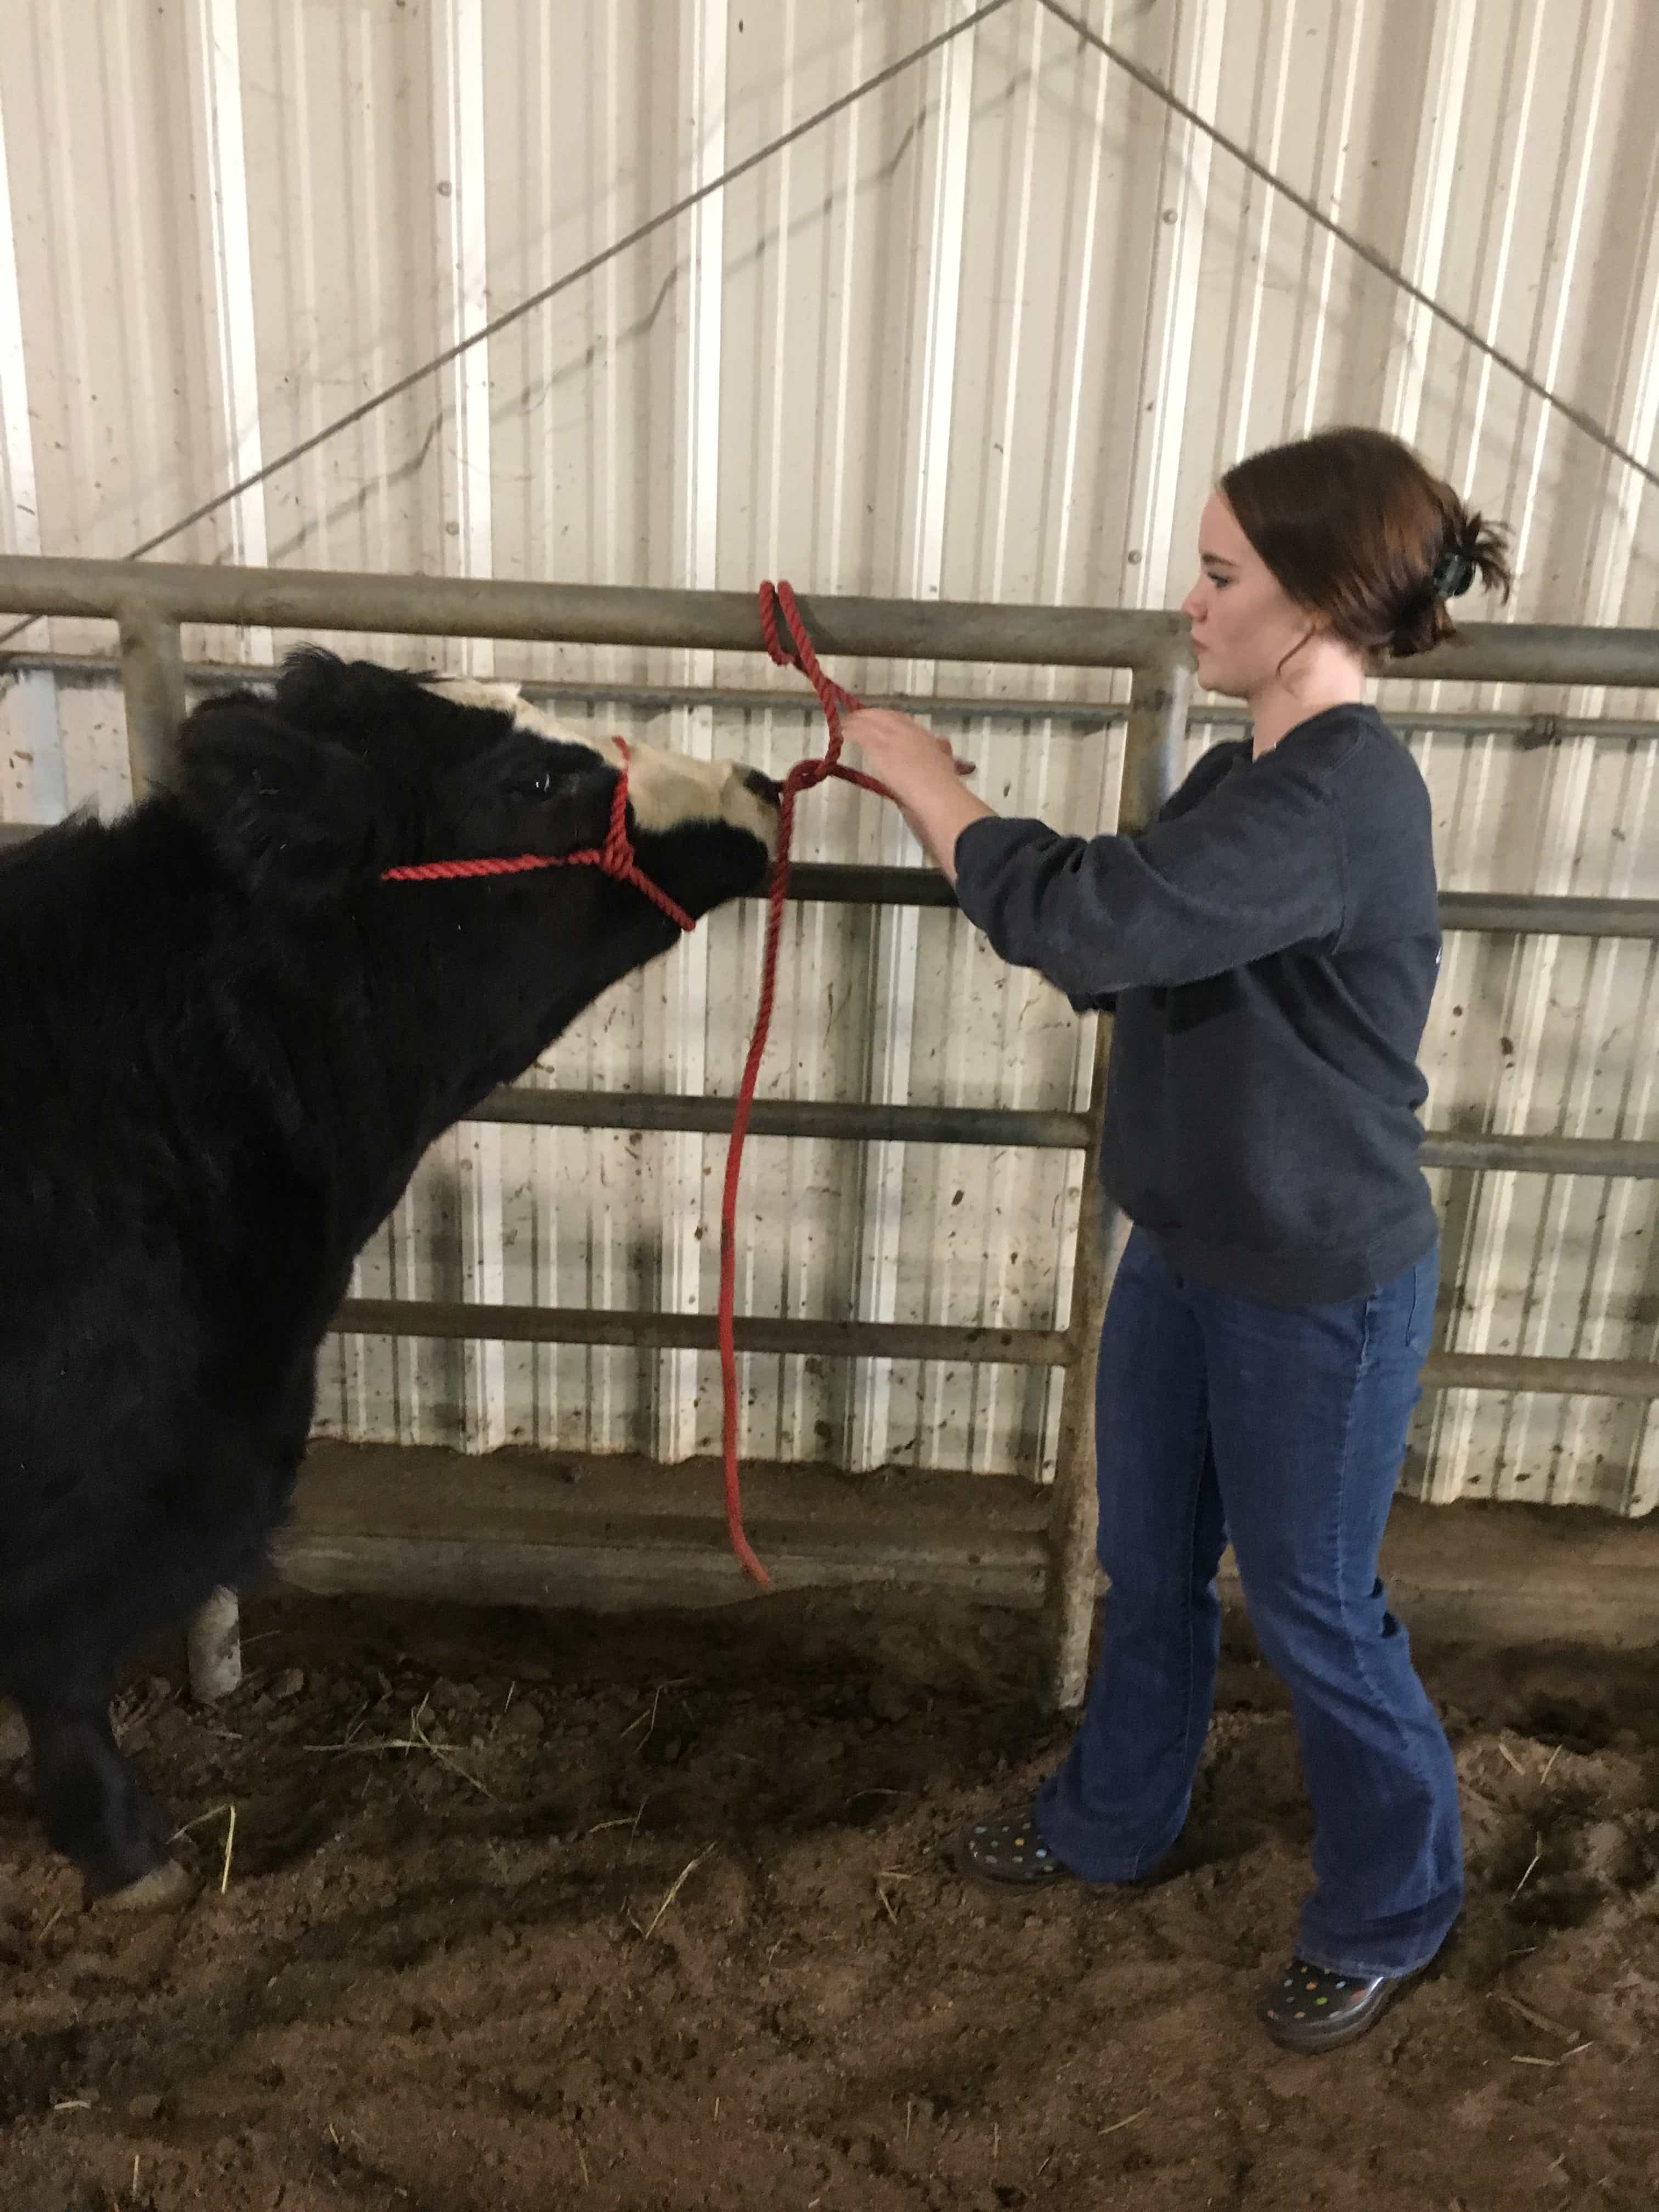 Trying to put a halter on new calf